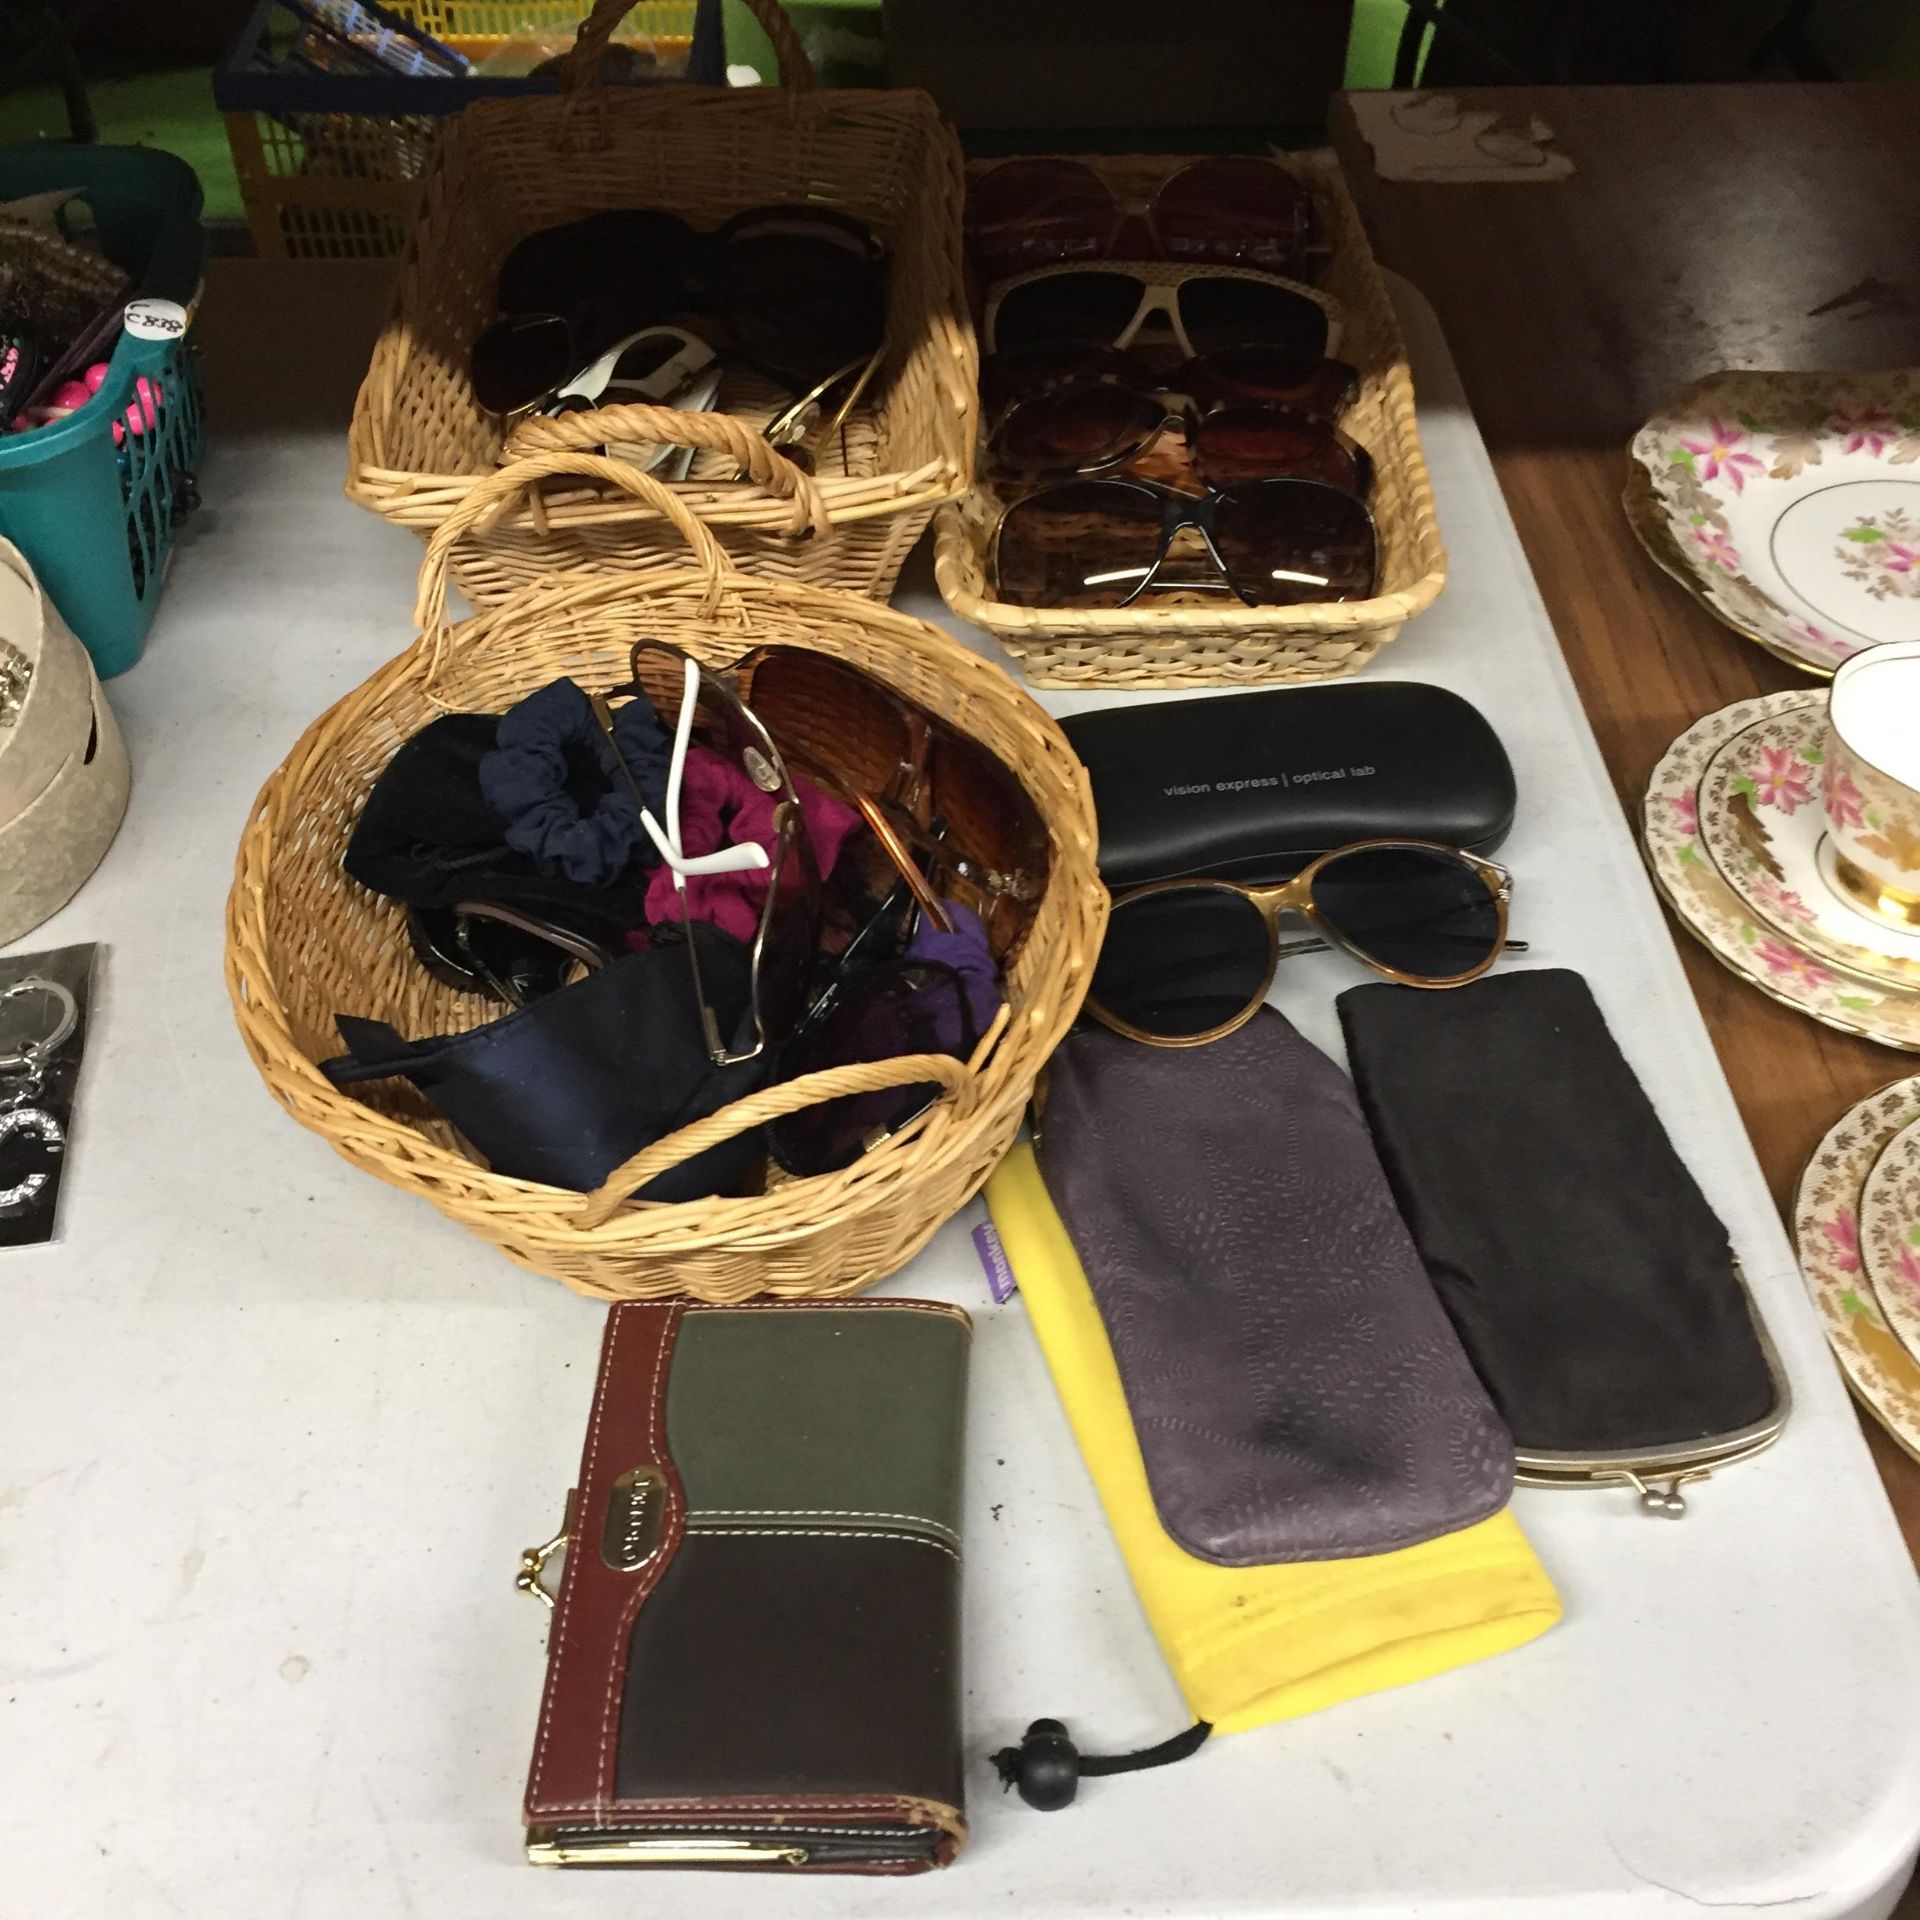 A GROUP OF VINTAGE SUNGLASSES AND PURSES